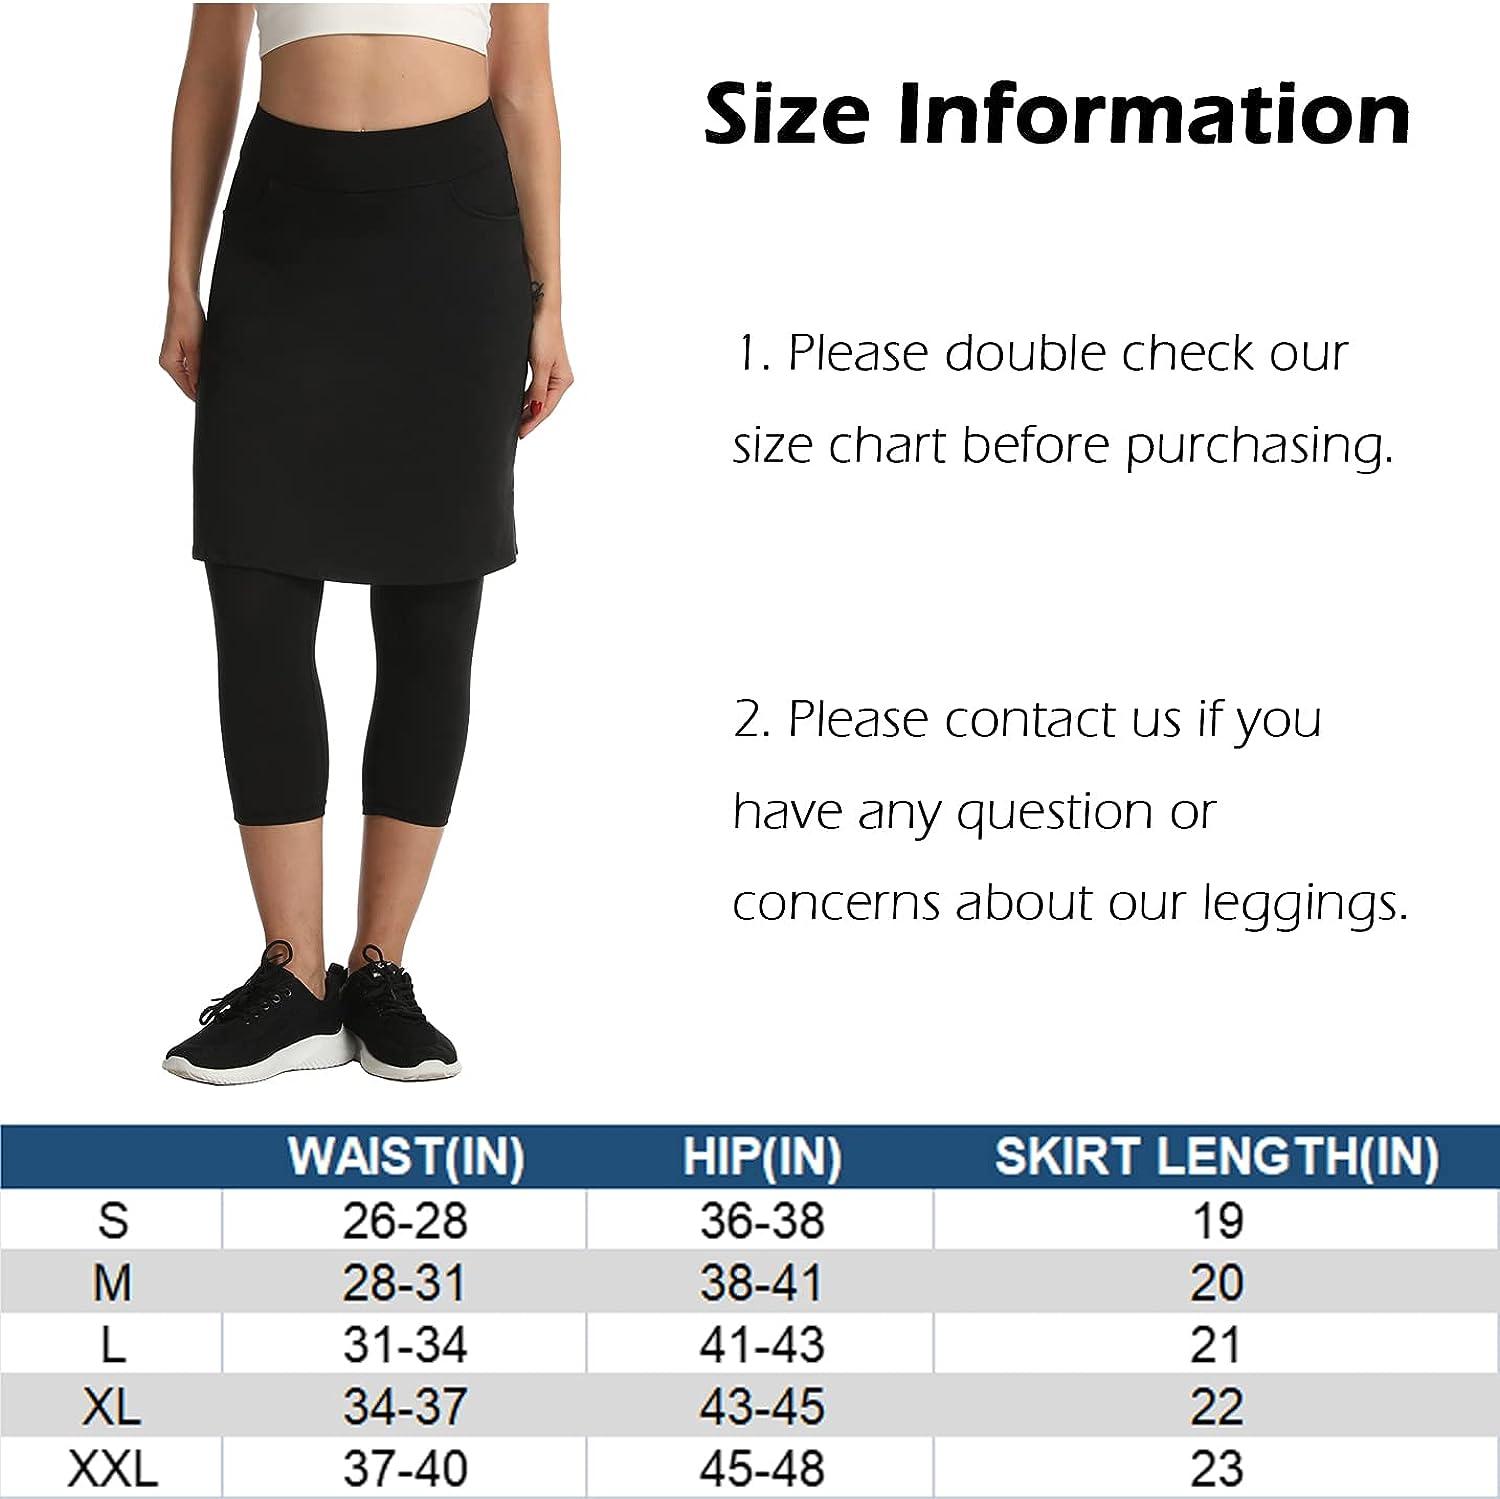 HOKOYI Modest Skirt with Leggings Attached for Women Workout Knee